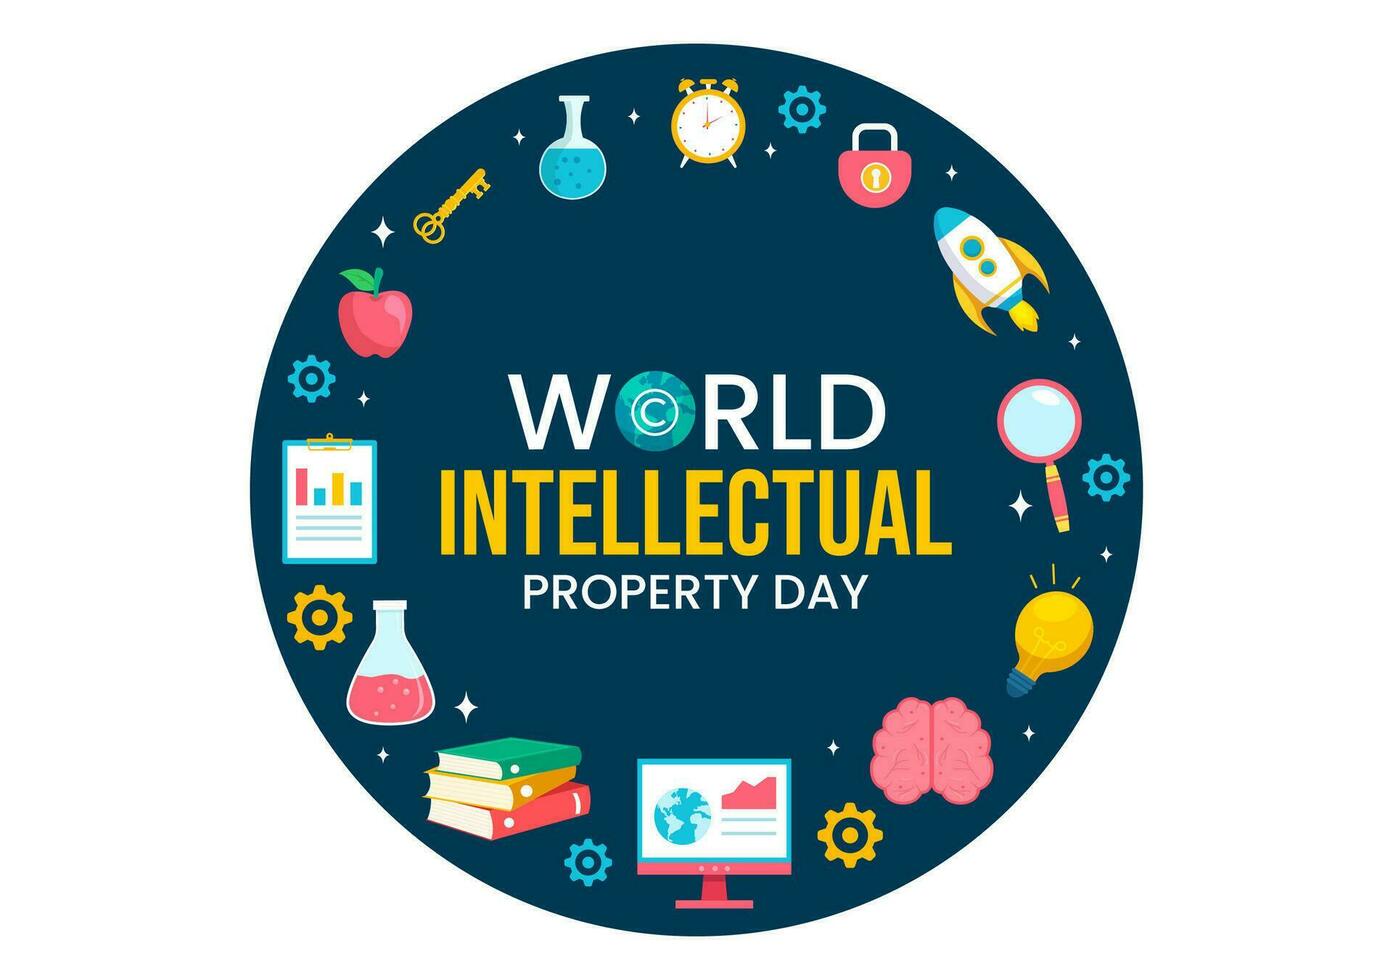 World Intellectual Property Day Vector Illustration on 26 April with Brain and Light Bulb for Innovation and Ideas Creativity Concept Background